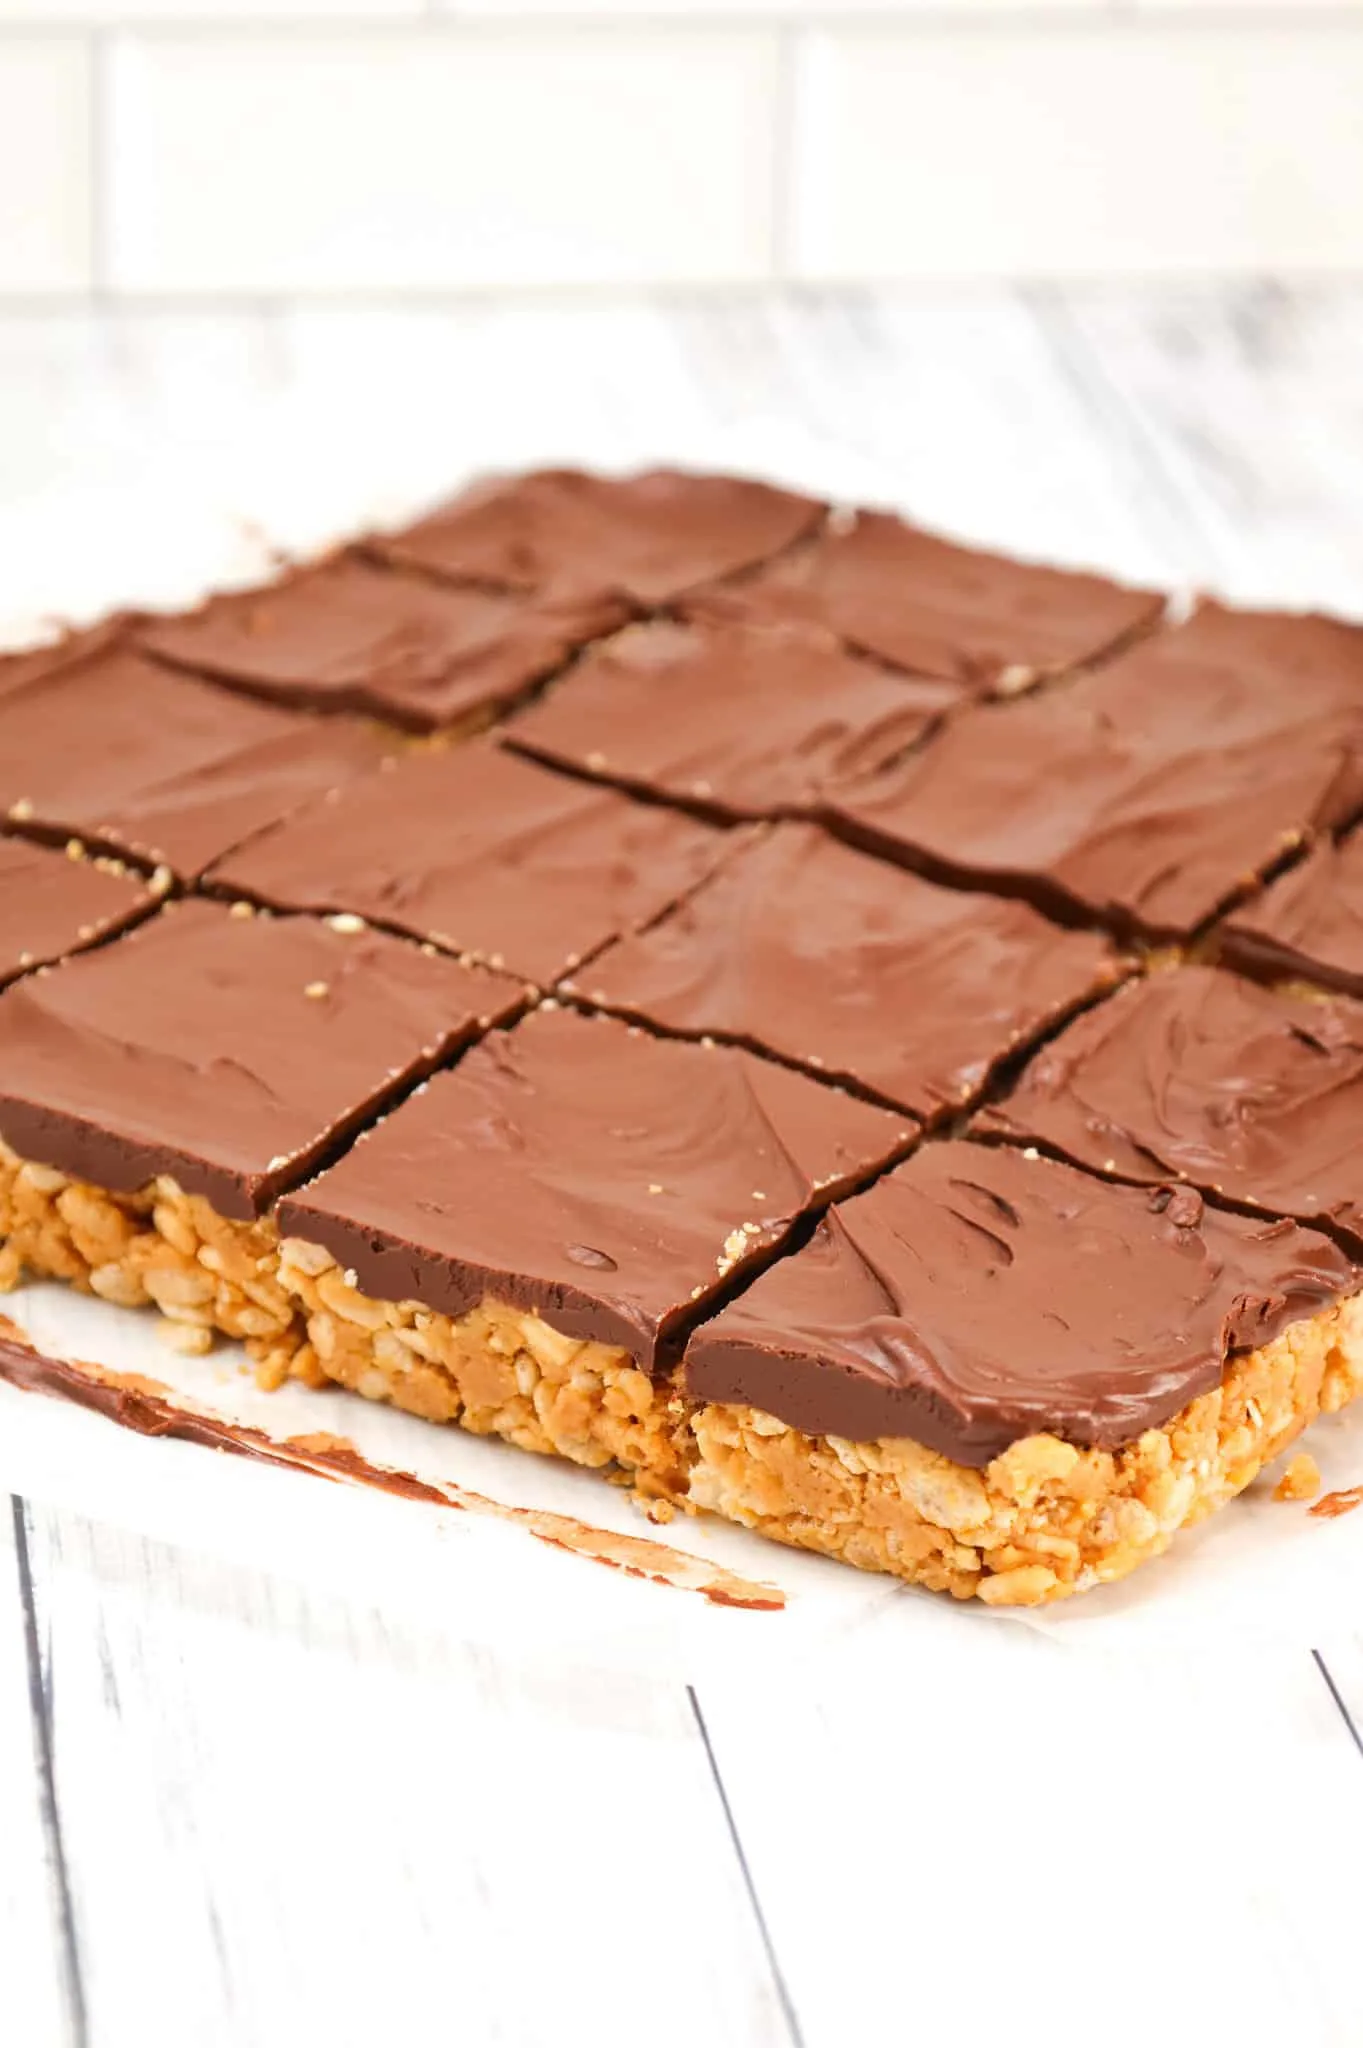 Peanut Butter Crunch Bars are an easy no bake dessert recipe made with base made from crunchy peanut butter, Rice Krispies, corn syrup, peanut butter baking chips and all topped with a layer of chocolate.